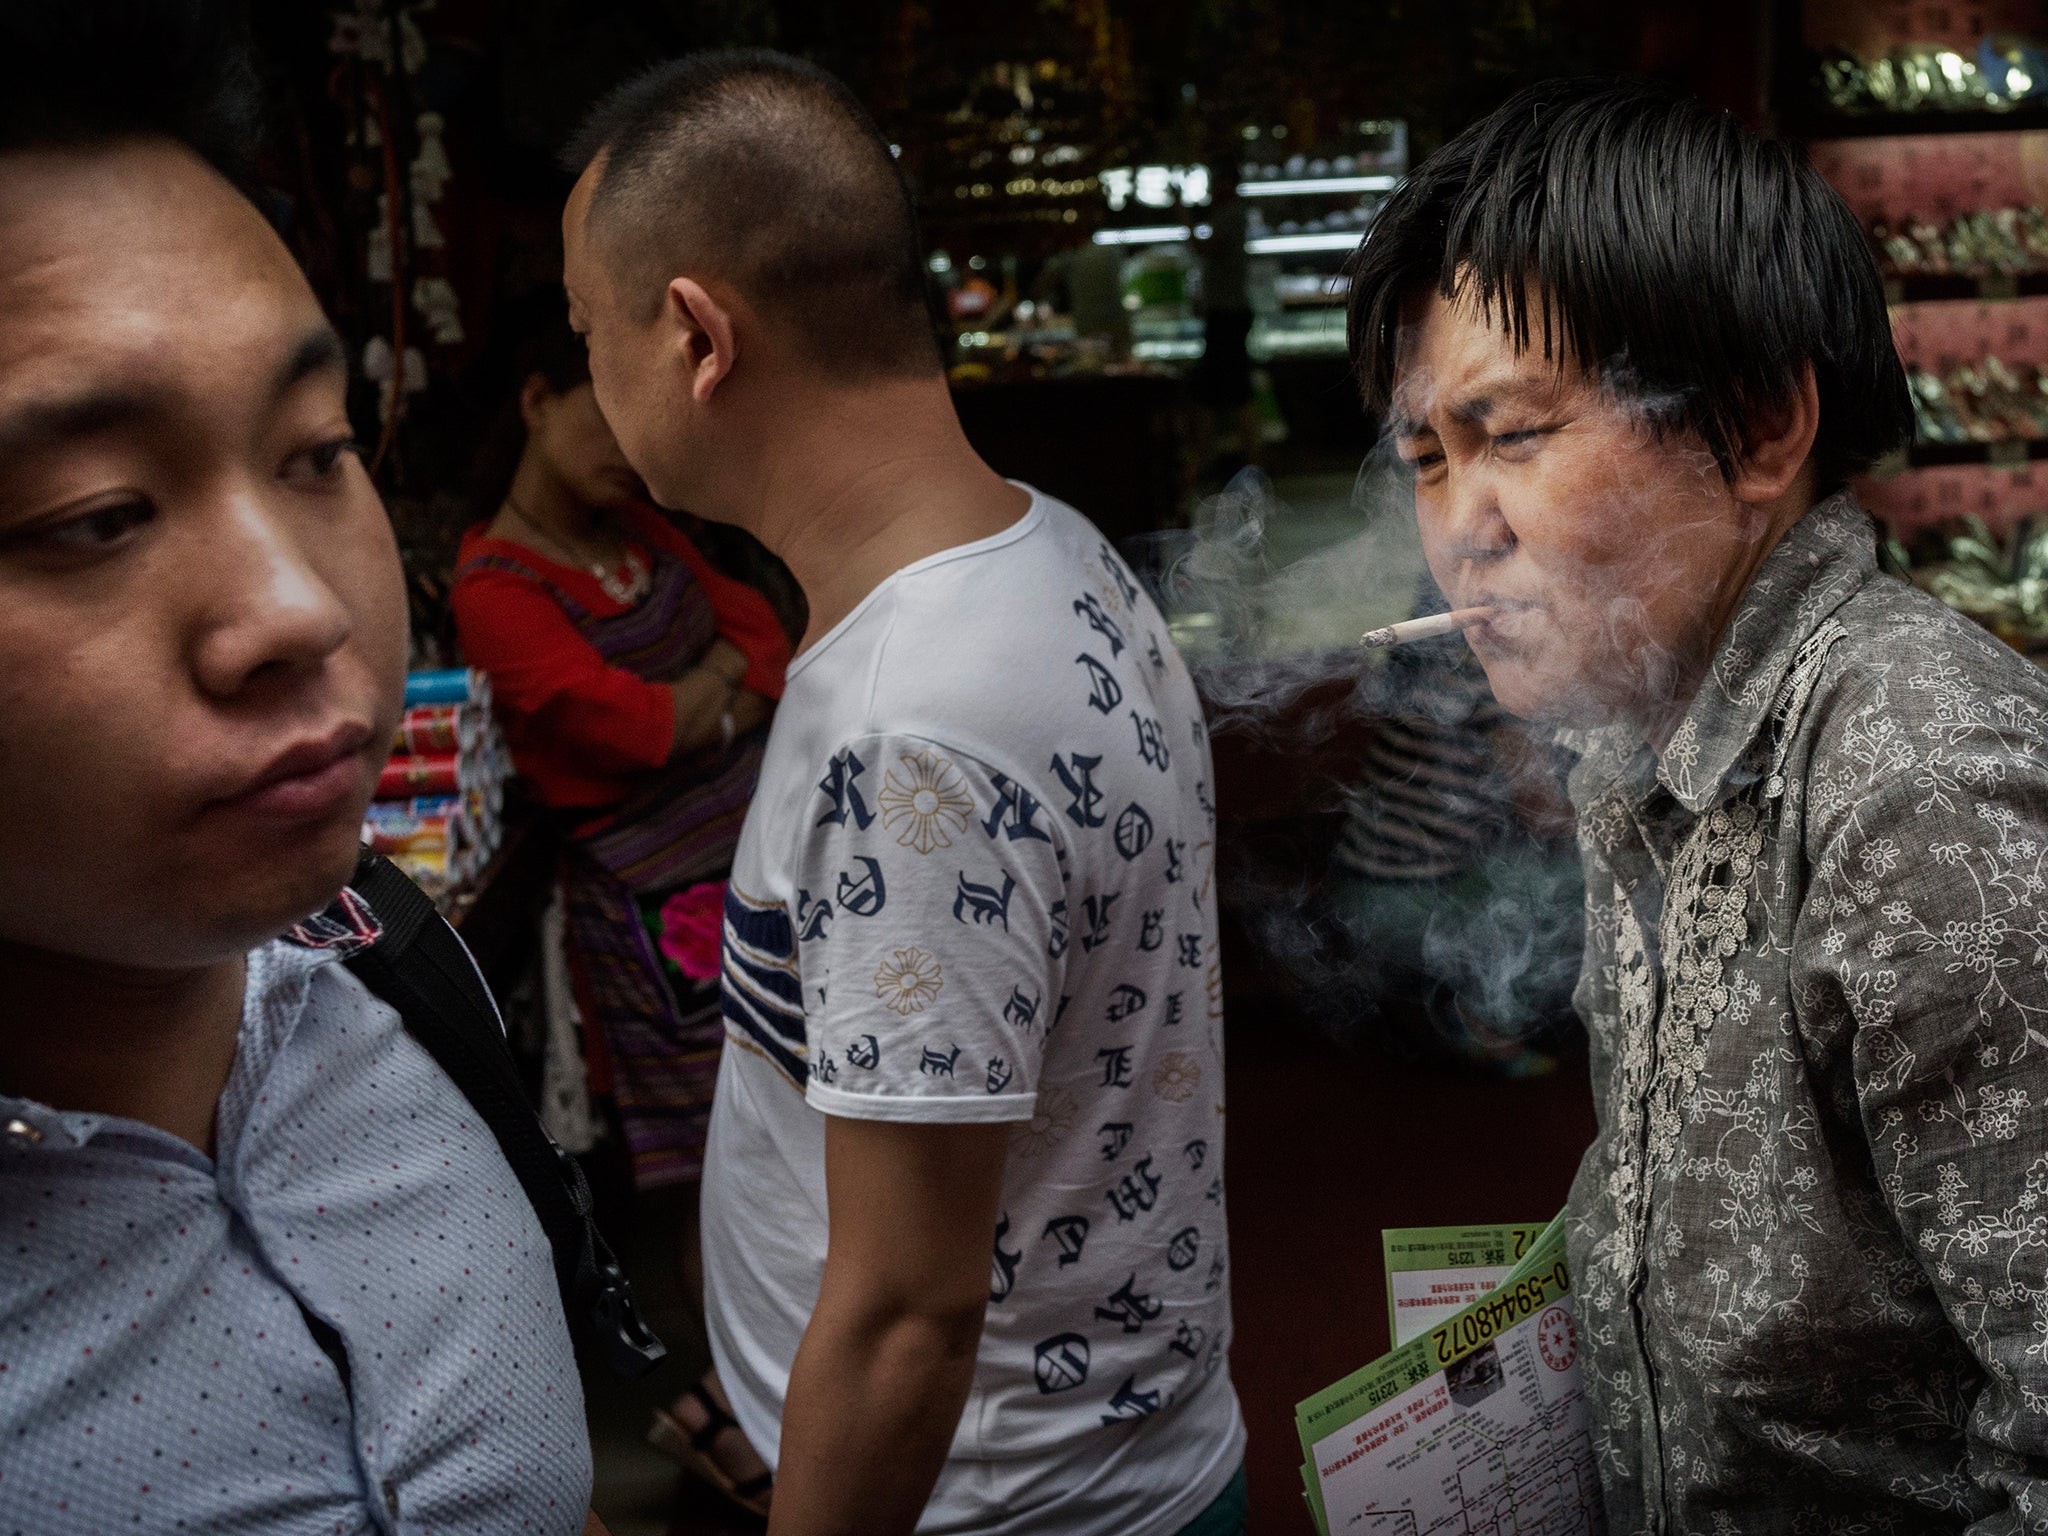 Anti-smoking advocates have praised the changes made this year